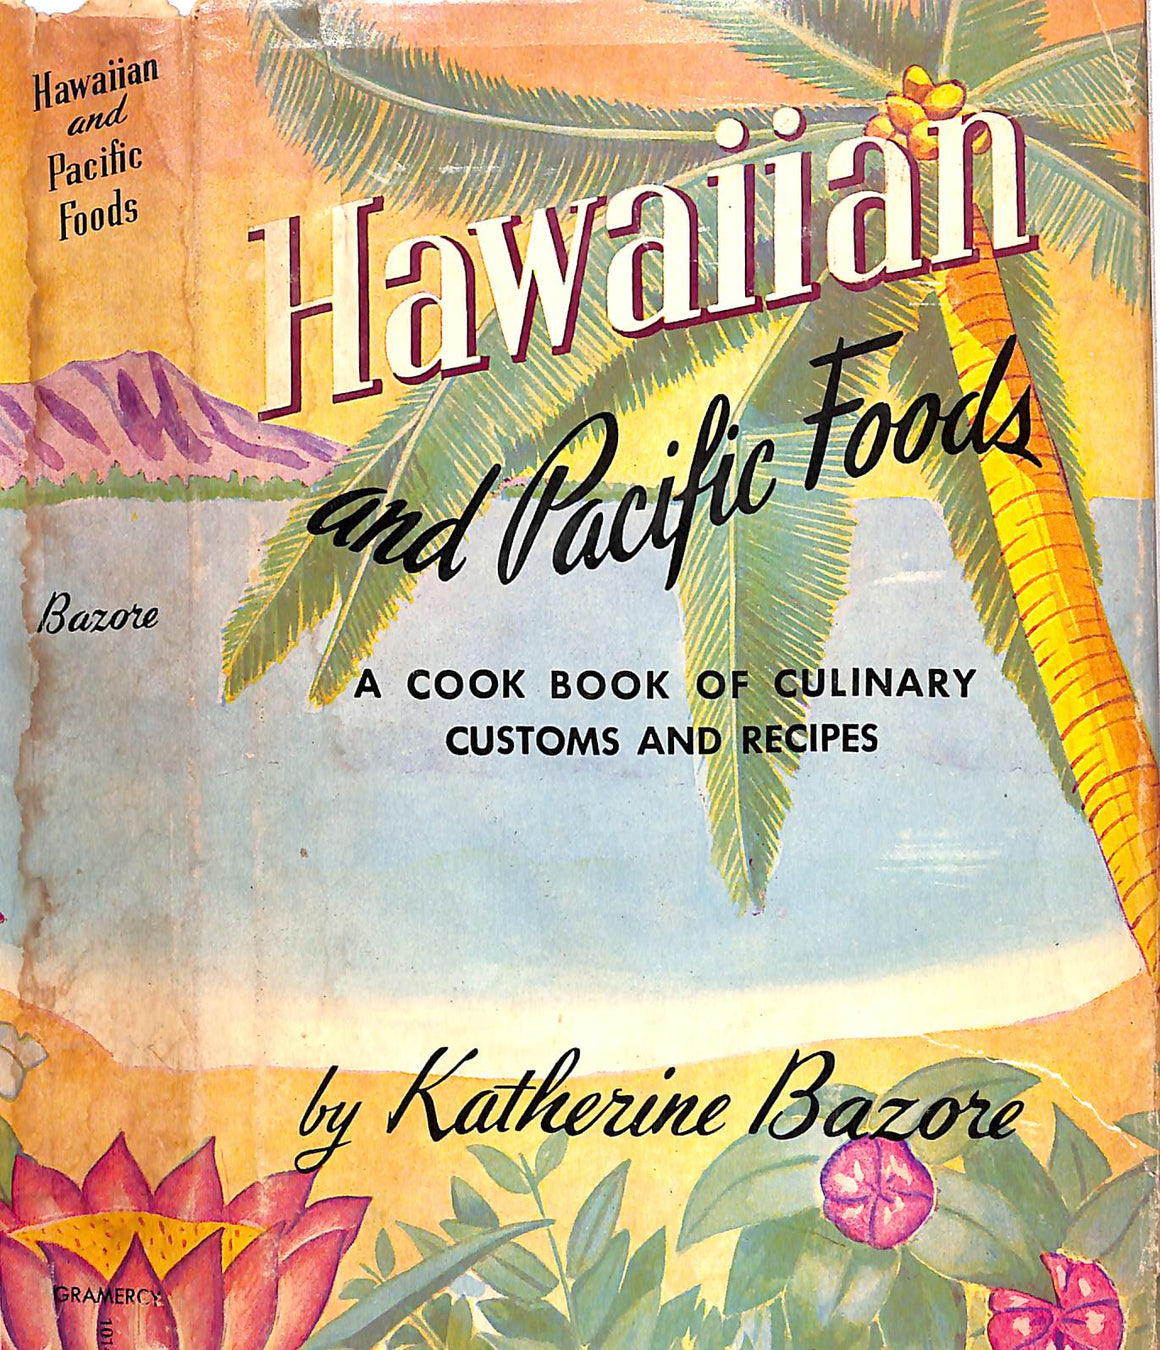 "Hawaiian And Pacific Foods: A Cook Book Of Culinary Customs And Recipes" 1947 BAZORE, Katherine